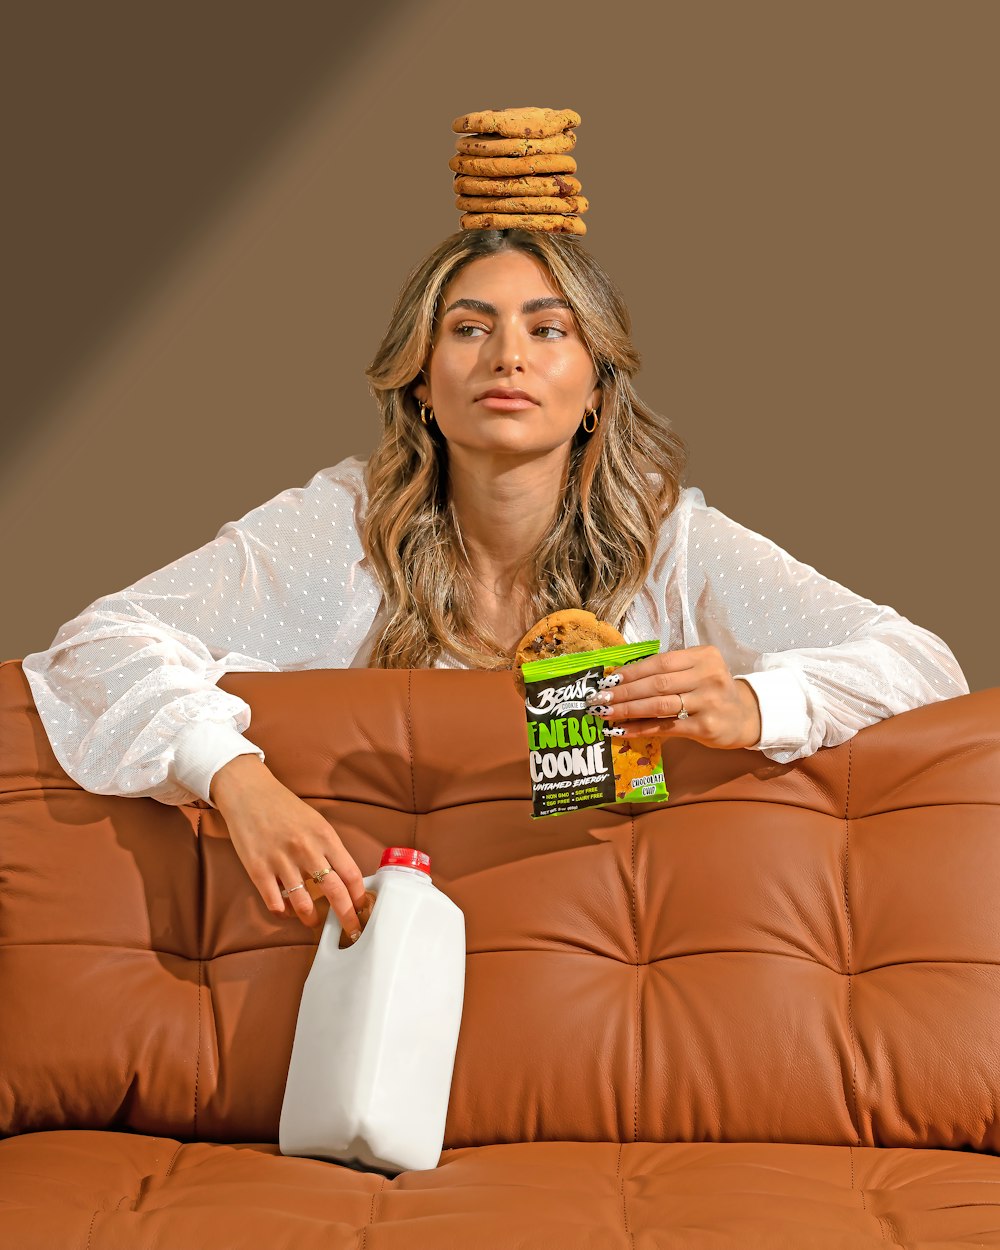 a woman sitting on a couch with a stack of cookies on her head